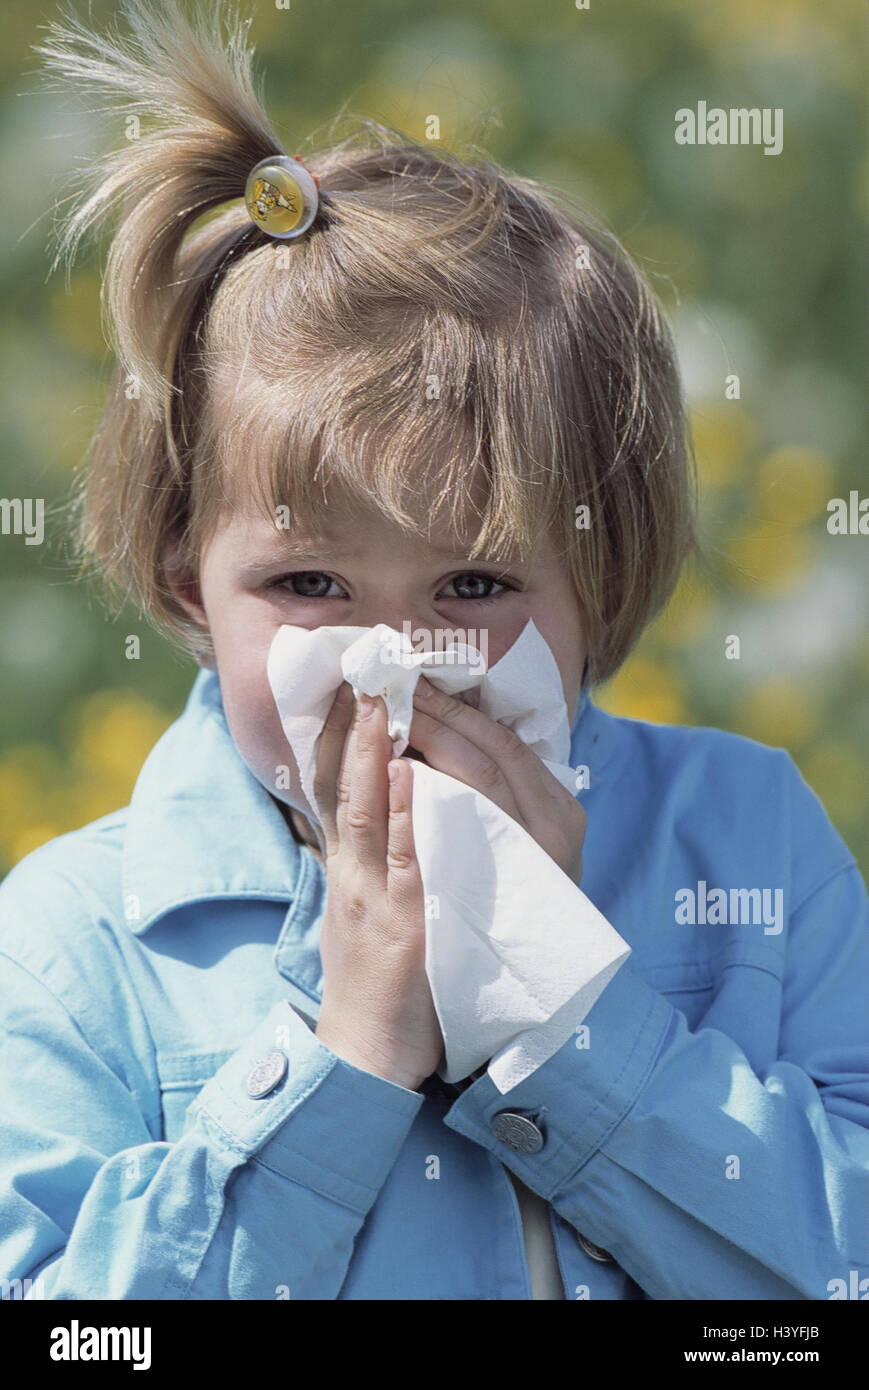 Girls, flower meadow, hay fever, paper tissue, portrait, meadow, flowers, child, allergy, polling allergy, reaction, allergically, pollen, allergens, pollen, flower pollen, polling allergy, sneeze, clean to walrus moustaches, nose, disease, summer, outsid Stock Photo